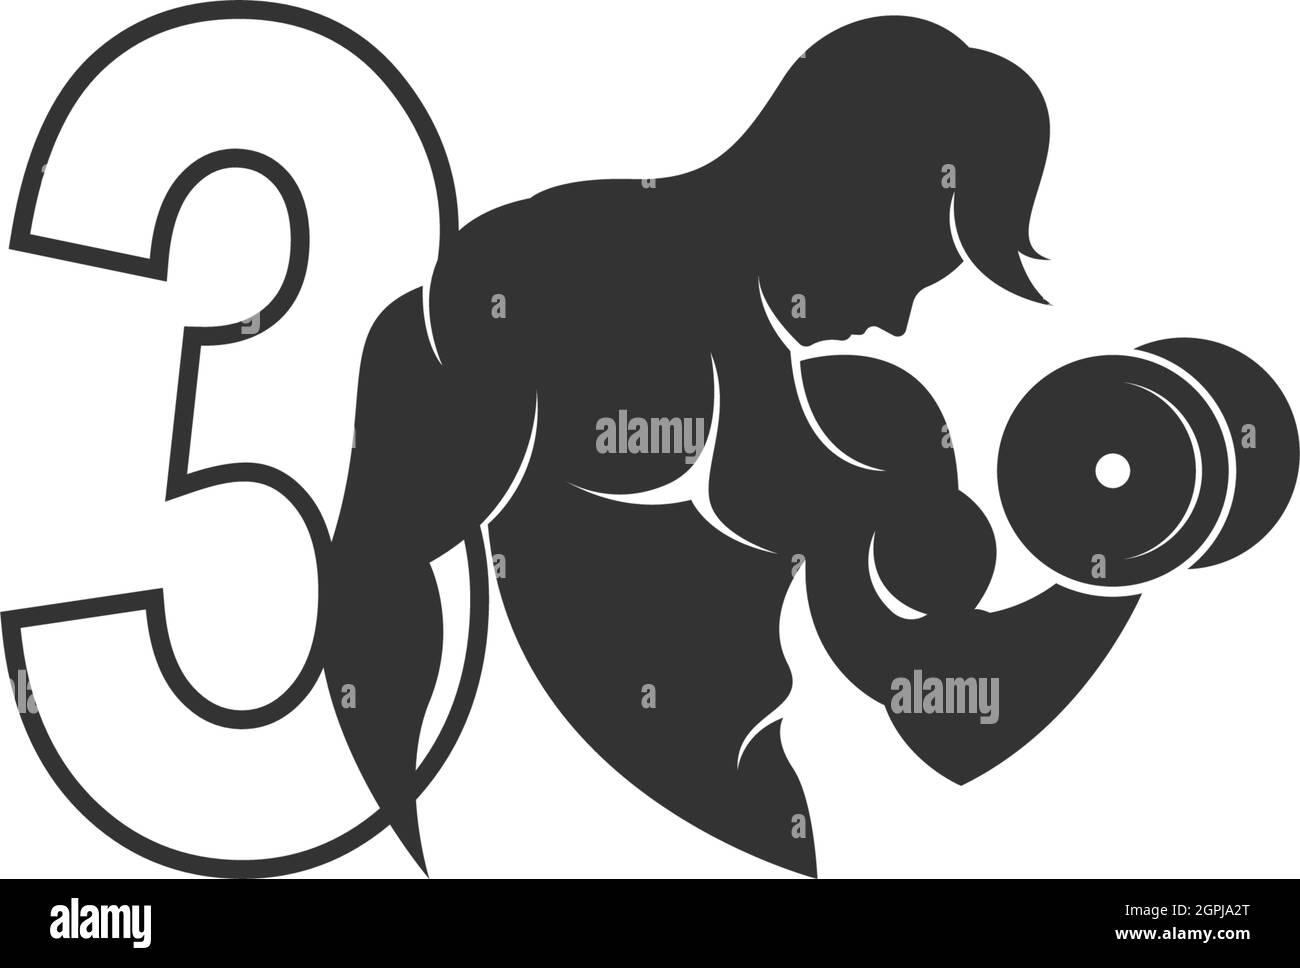 Number 3 logo icon with a person holding barbell design vector Stock Vector